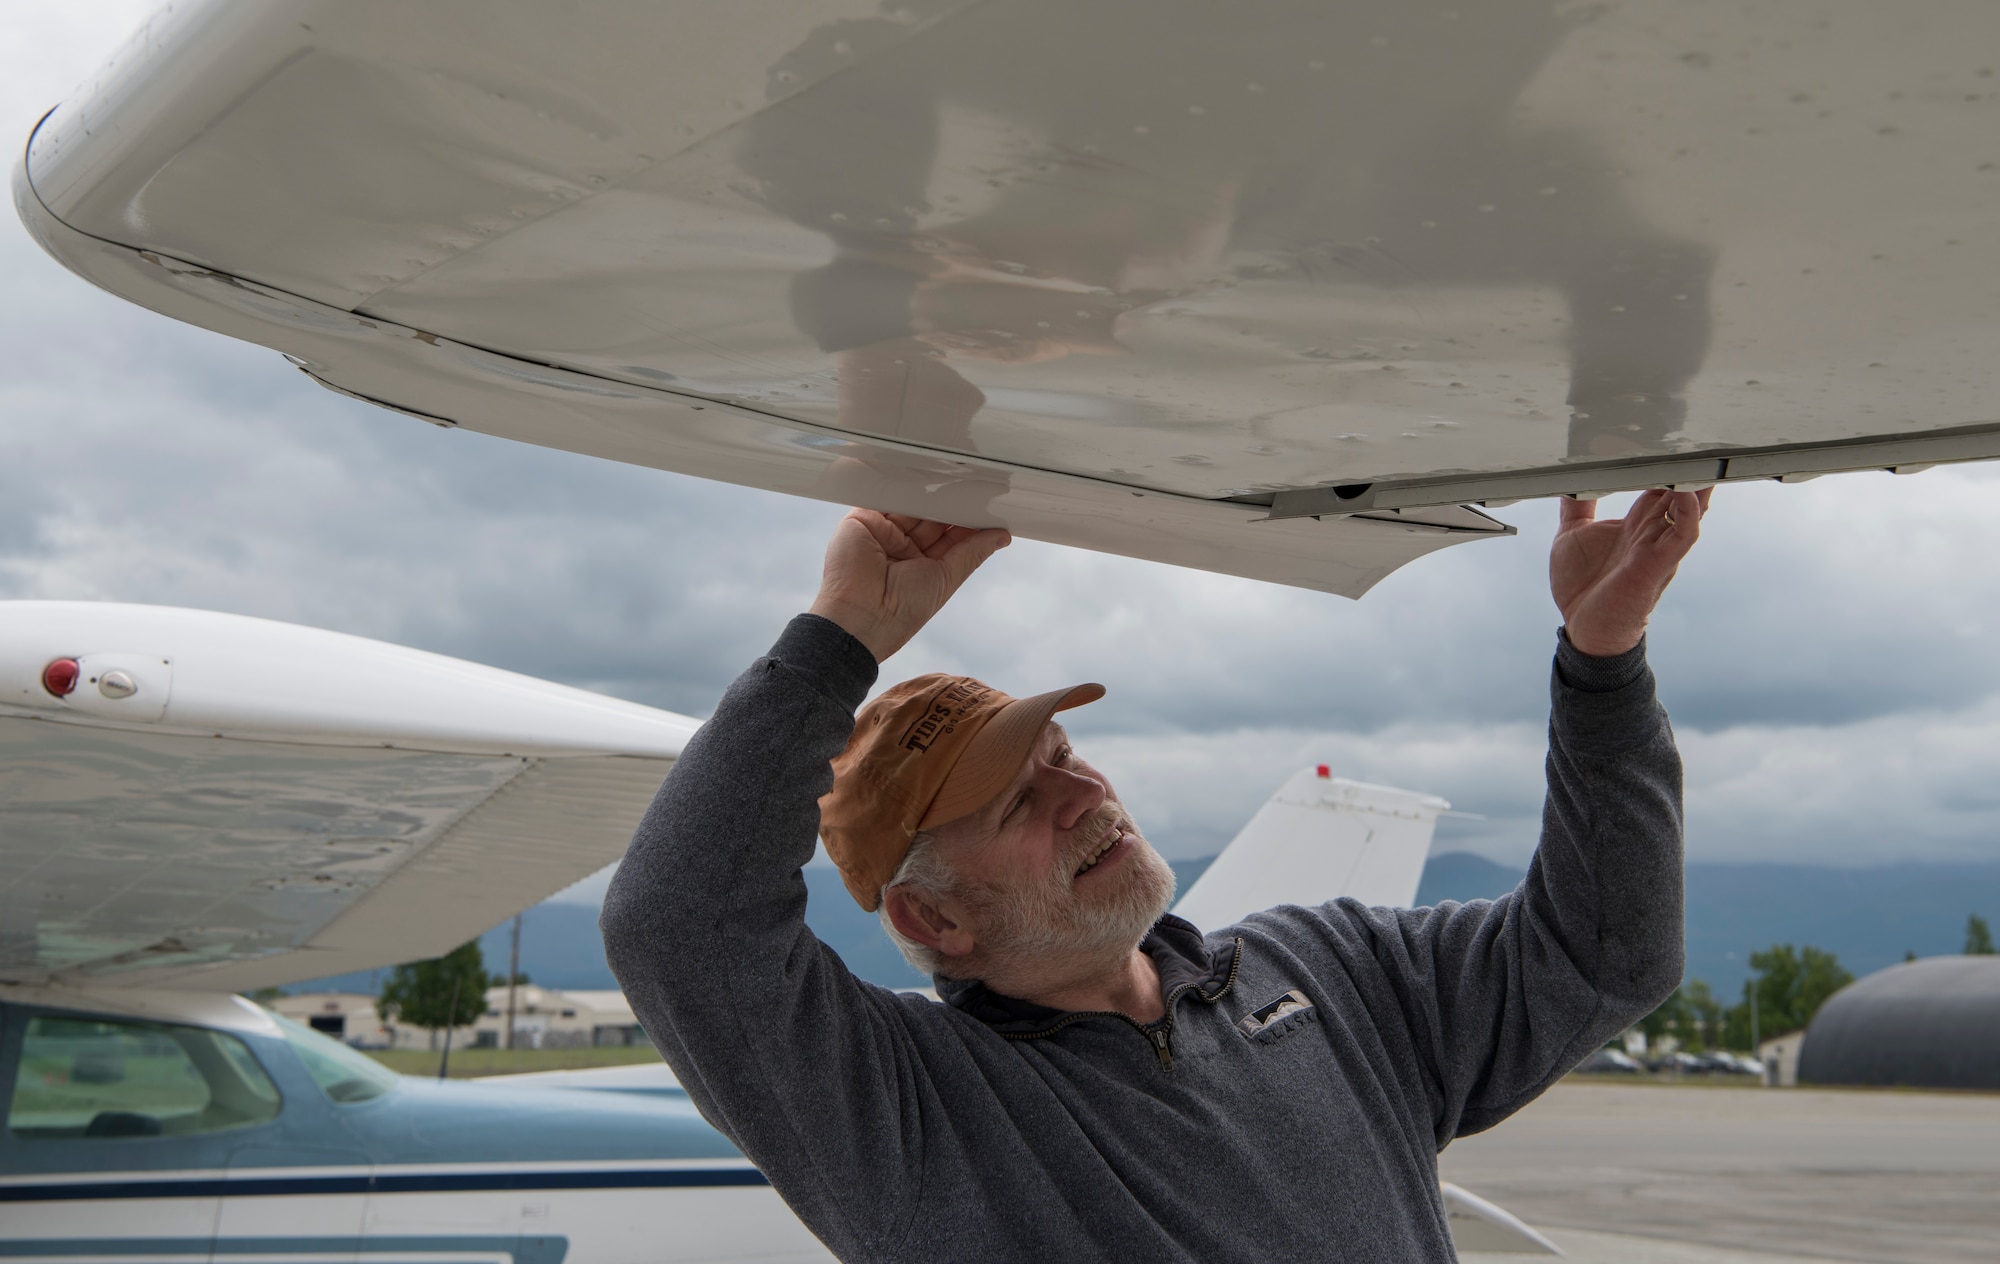 David Price, an Elmendorf Aero Club member, performs a pre-flight inspection of the Aircraft he is renting from the club at Joint Base Elmendorf-Richardson, Alaska, June 25, 2018. The club is open to all active-duty, retirees, Department of Defense civilians, National Guard and Reserve employees and dependents. A monthly membership includes the use of available rentable airplanes and for some additional fees, the instruction and rentable hangar spaces are available.